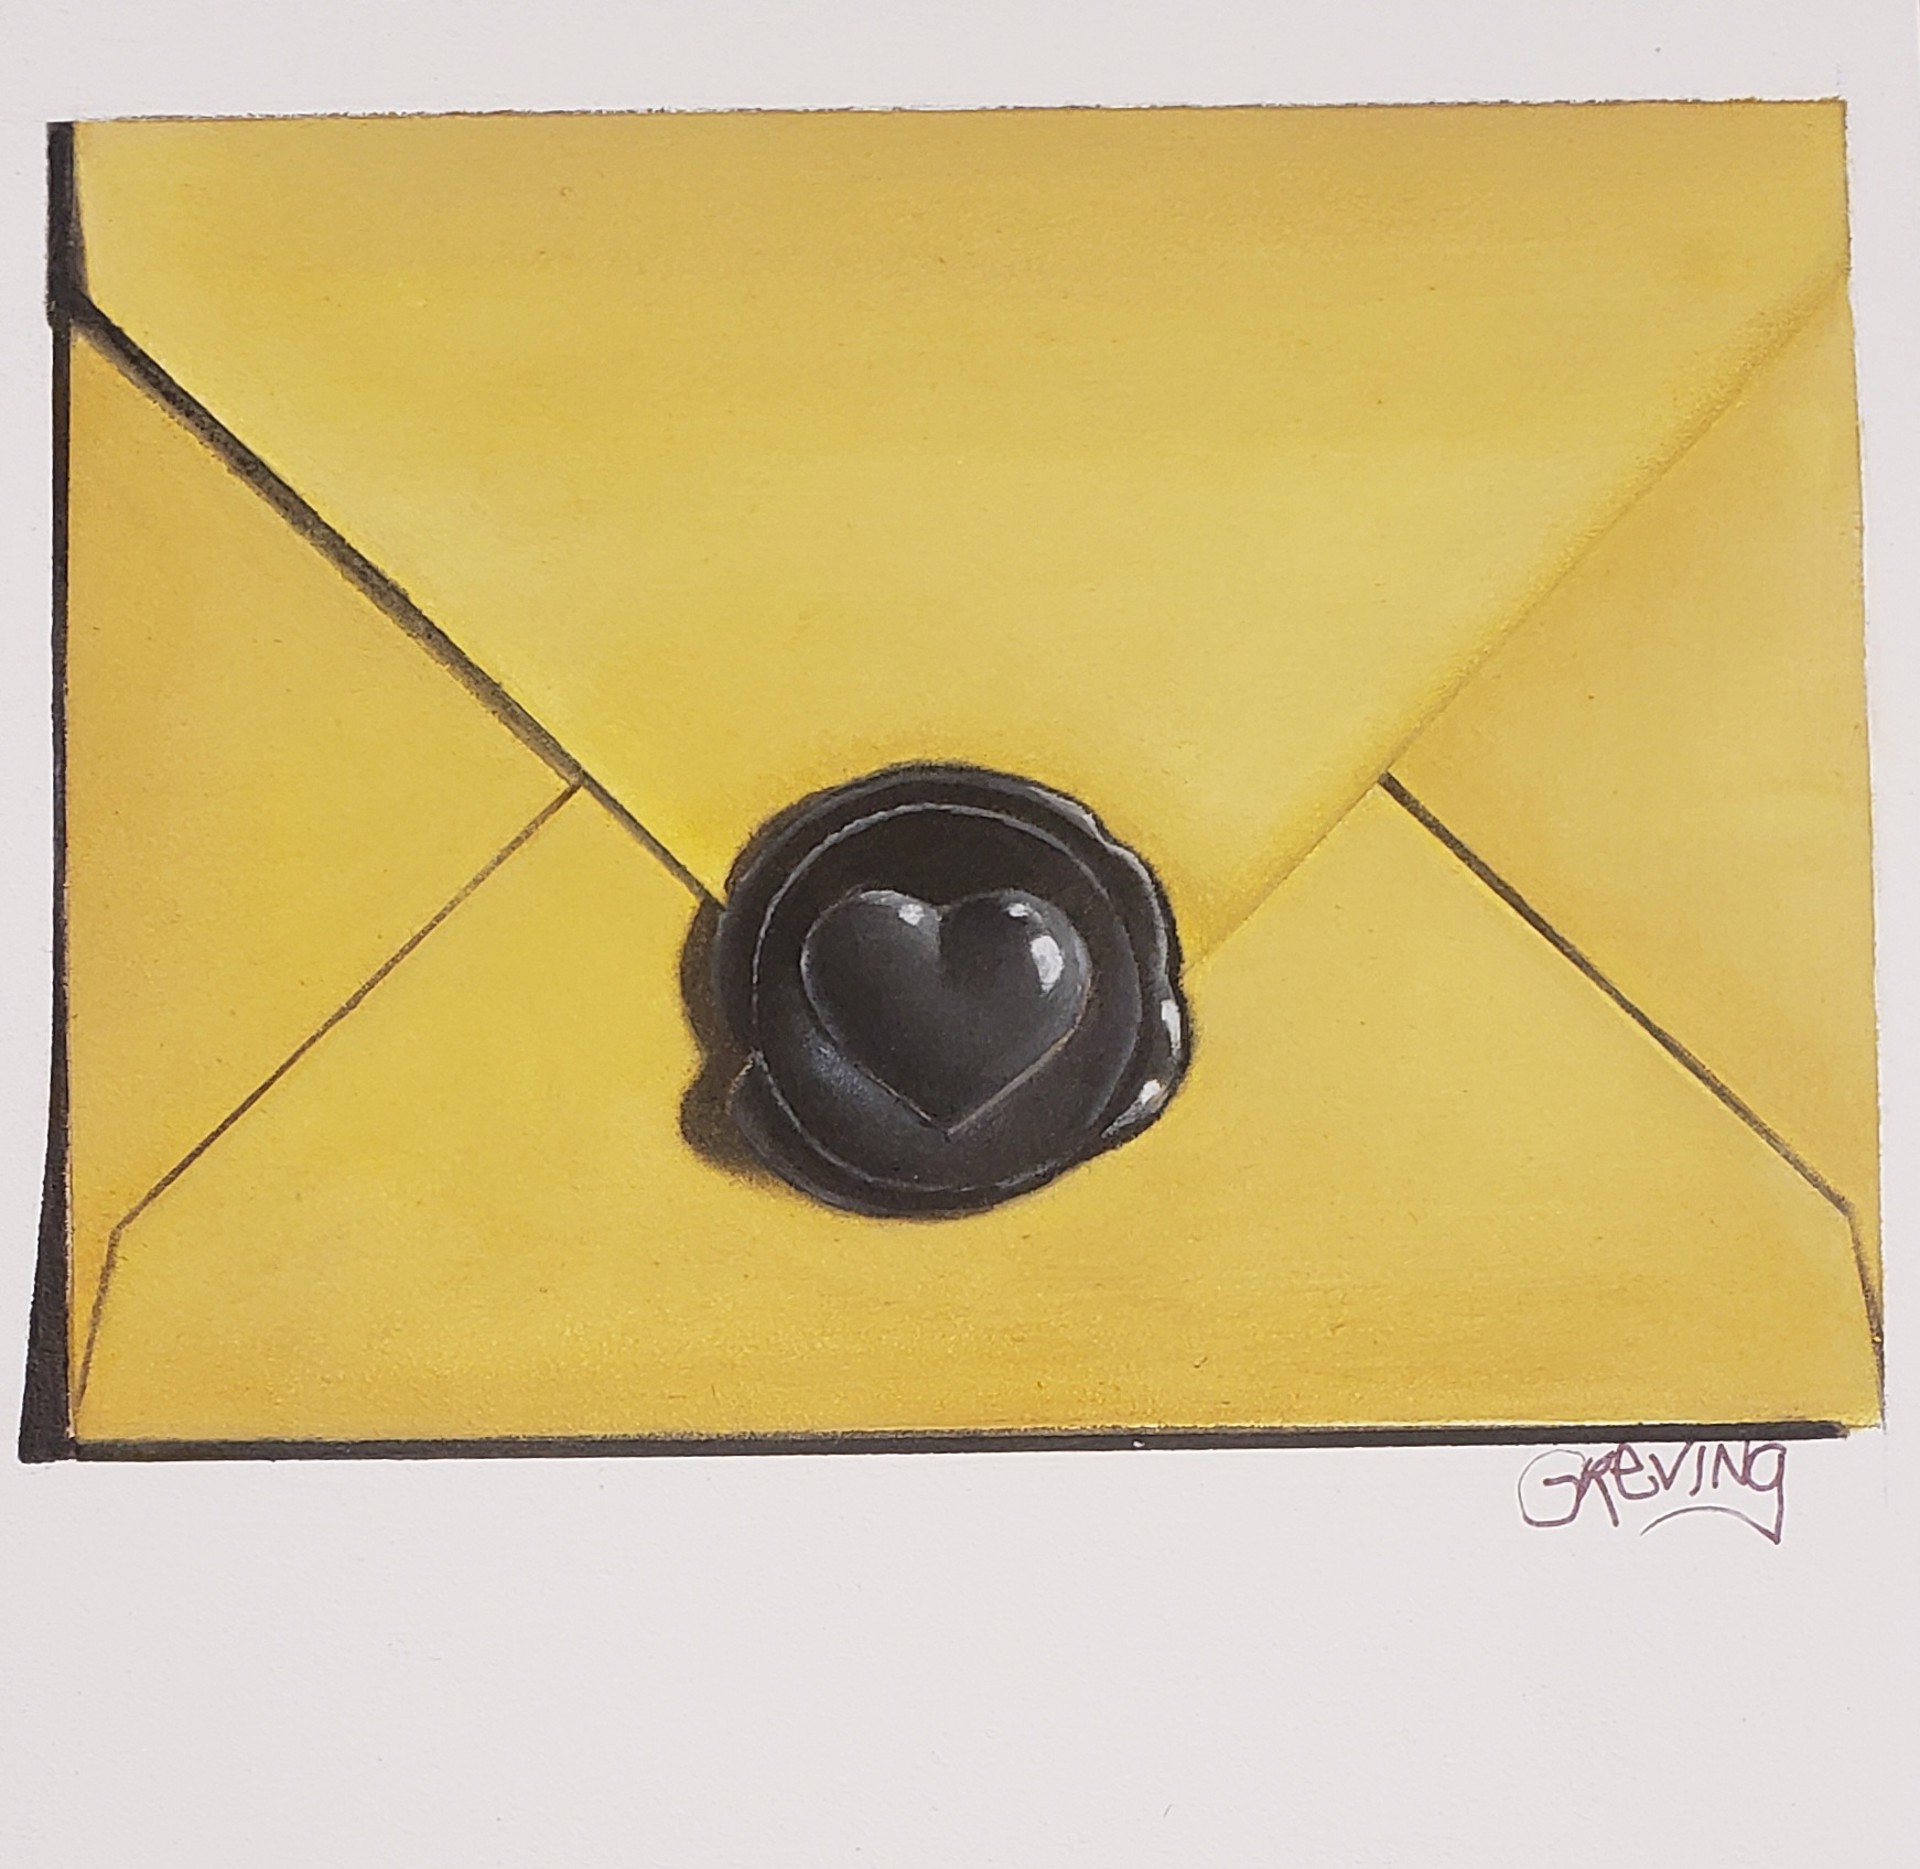 Gold Envelope with Black Heart Stamp by Barbara Greving